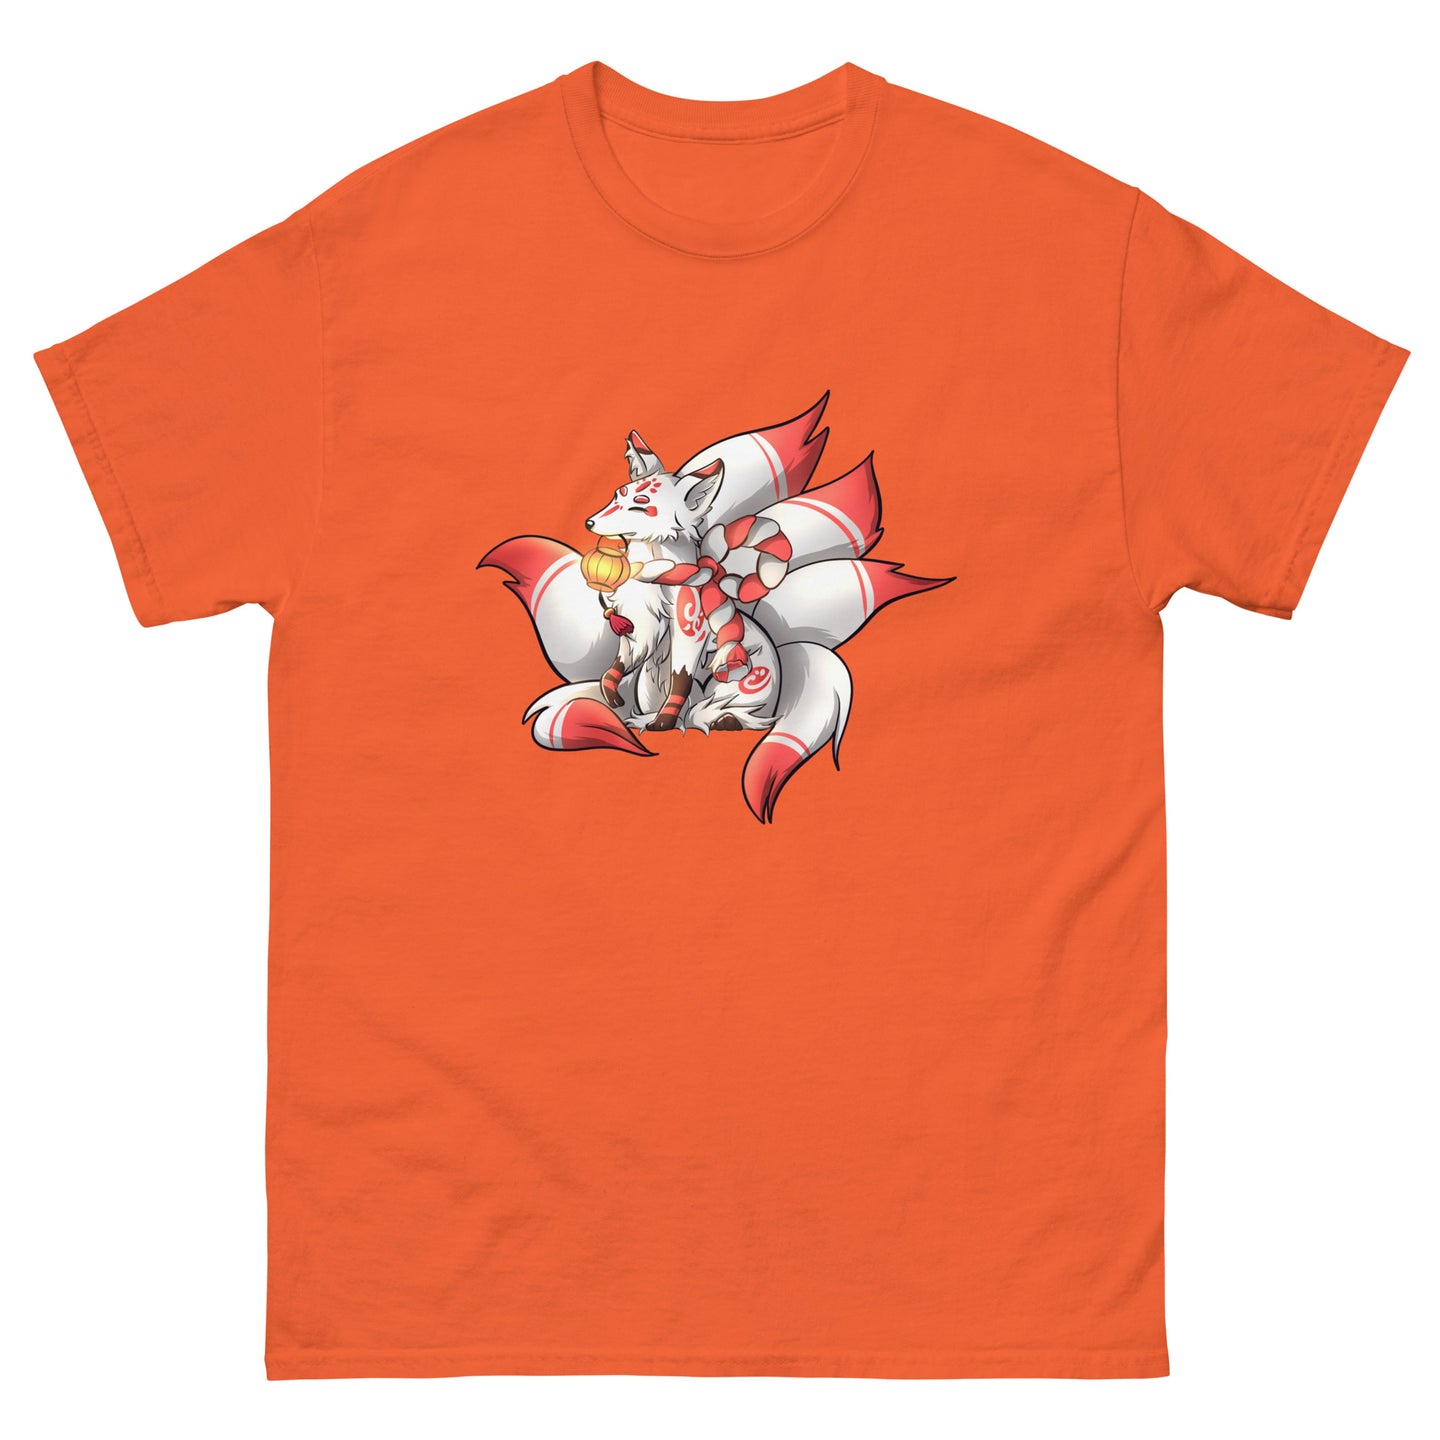 Japanese Kitsune T-Shirt - Soft, Comfortable, and Stylish for Gamers and Streamers